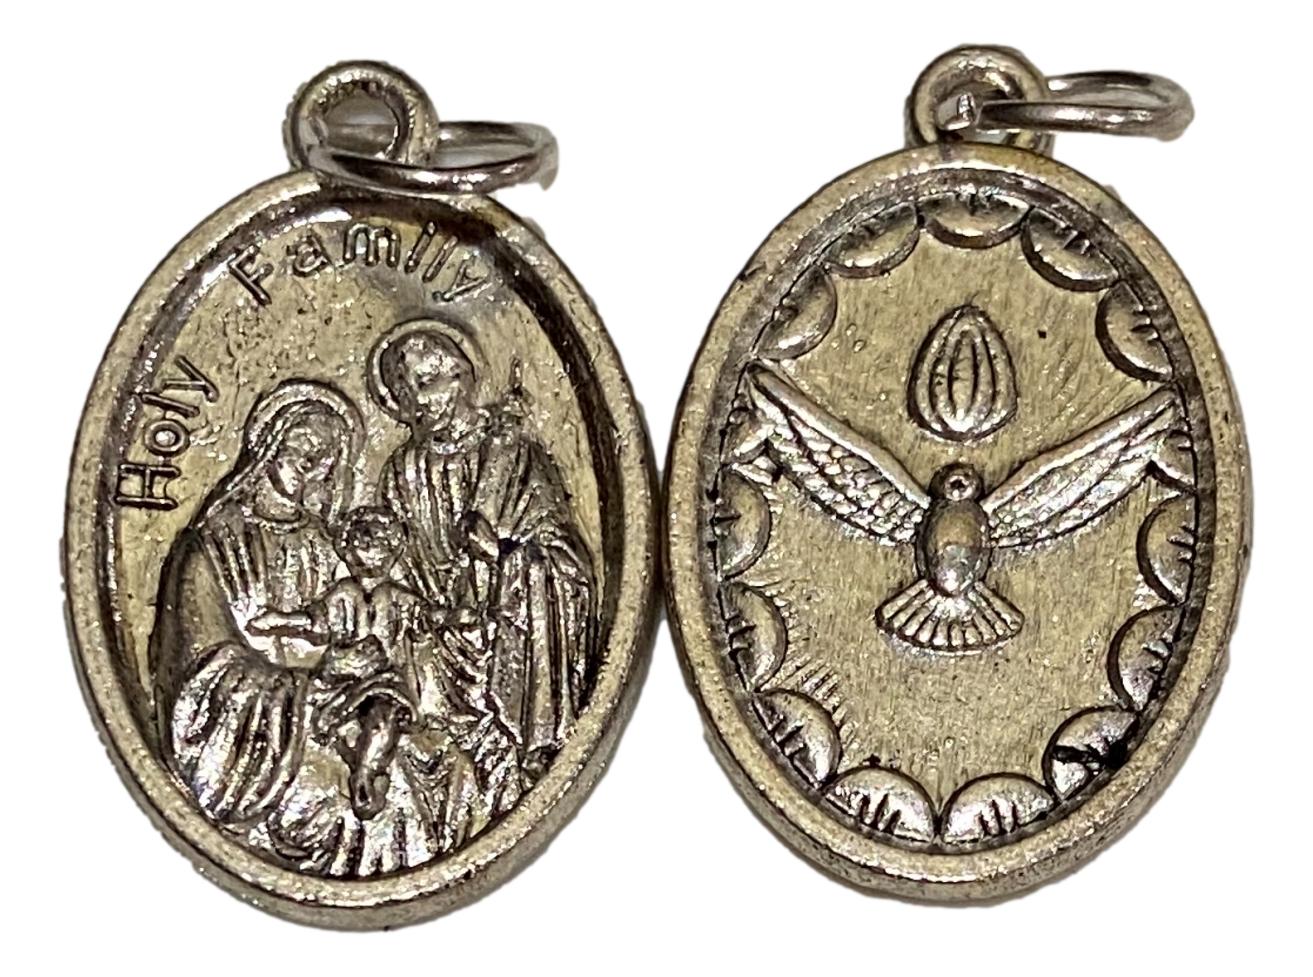 Medal Holy Family Italian Double-Sided Silver Oxidized Metal Alloy 1 inch - Ysleta Mission Gift Shop- VOTED El Paso's Best Gift Shop